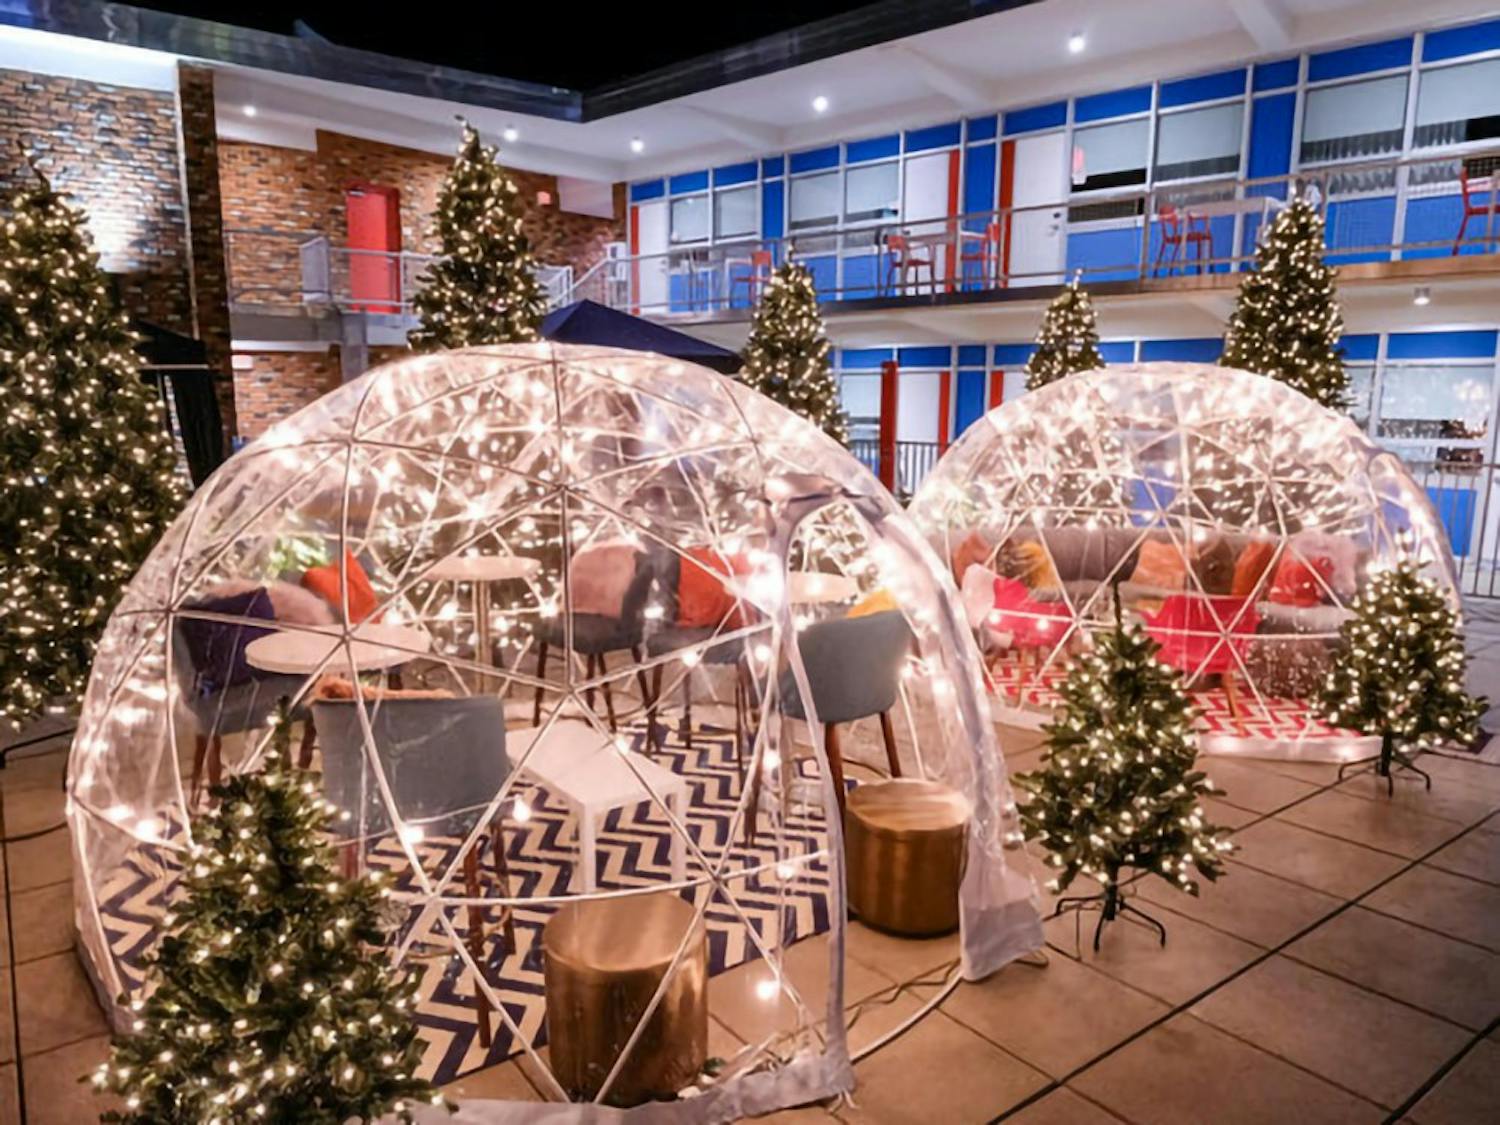 Socially-distanced dining has inspired some creative solutions, but is an expensive, plushly-furnished igloo the best alternative to regular outdoor dining?